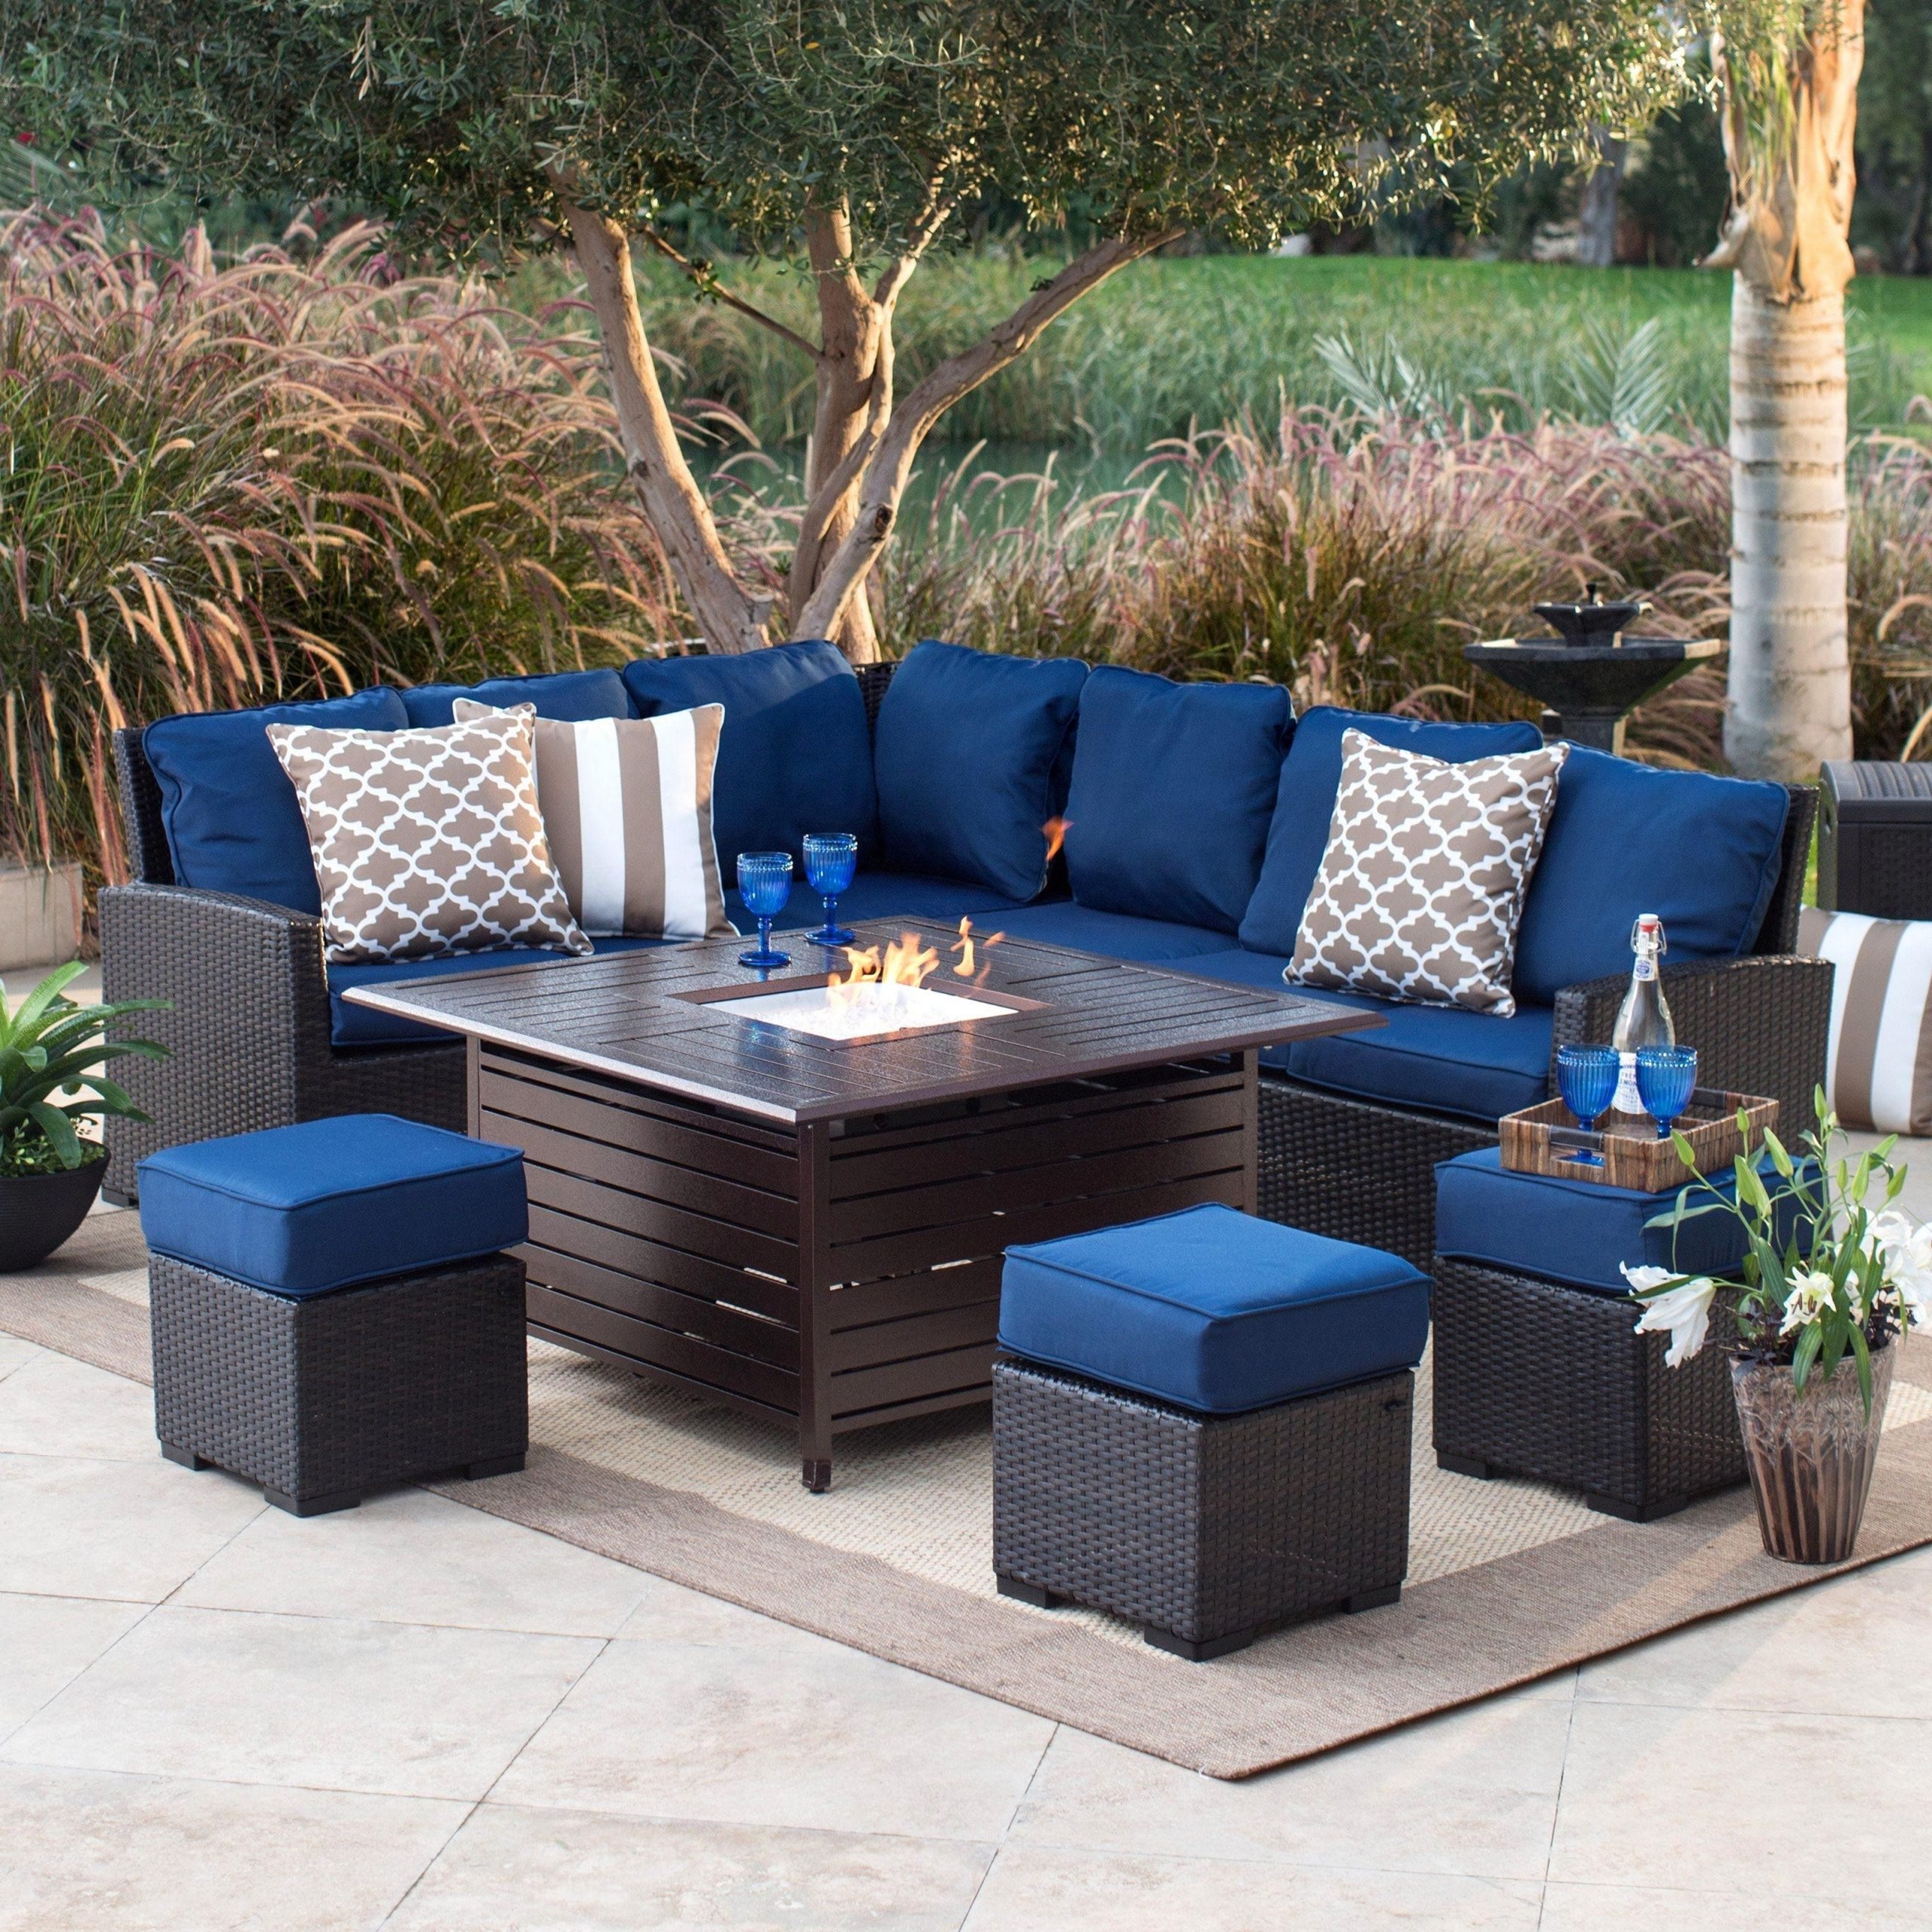 Outdoor Patio Set With Fire Pit